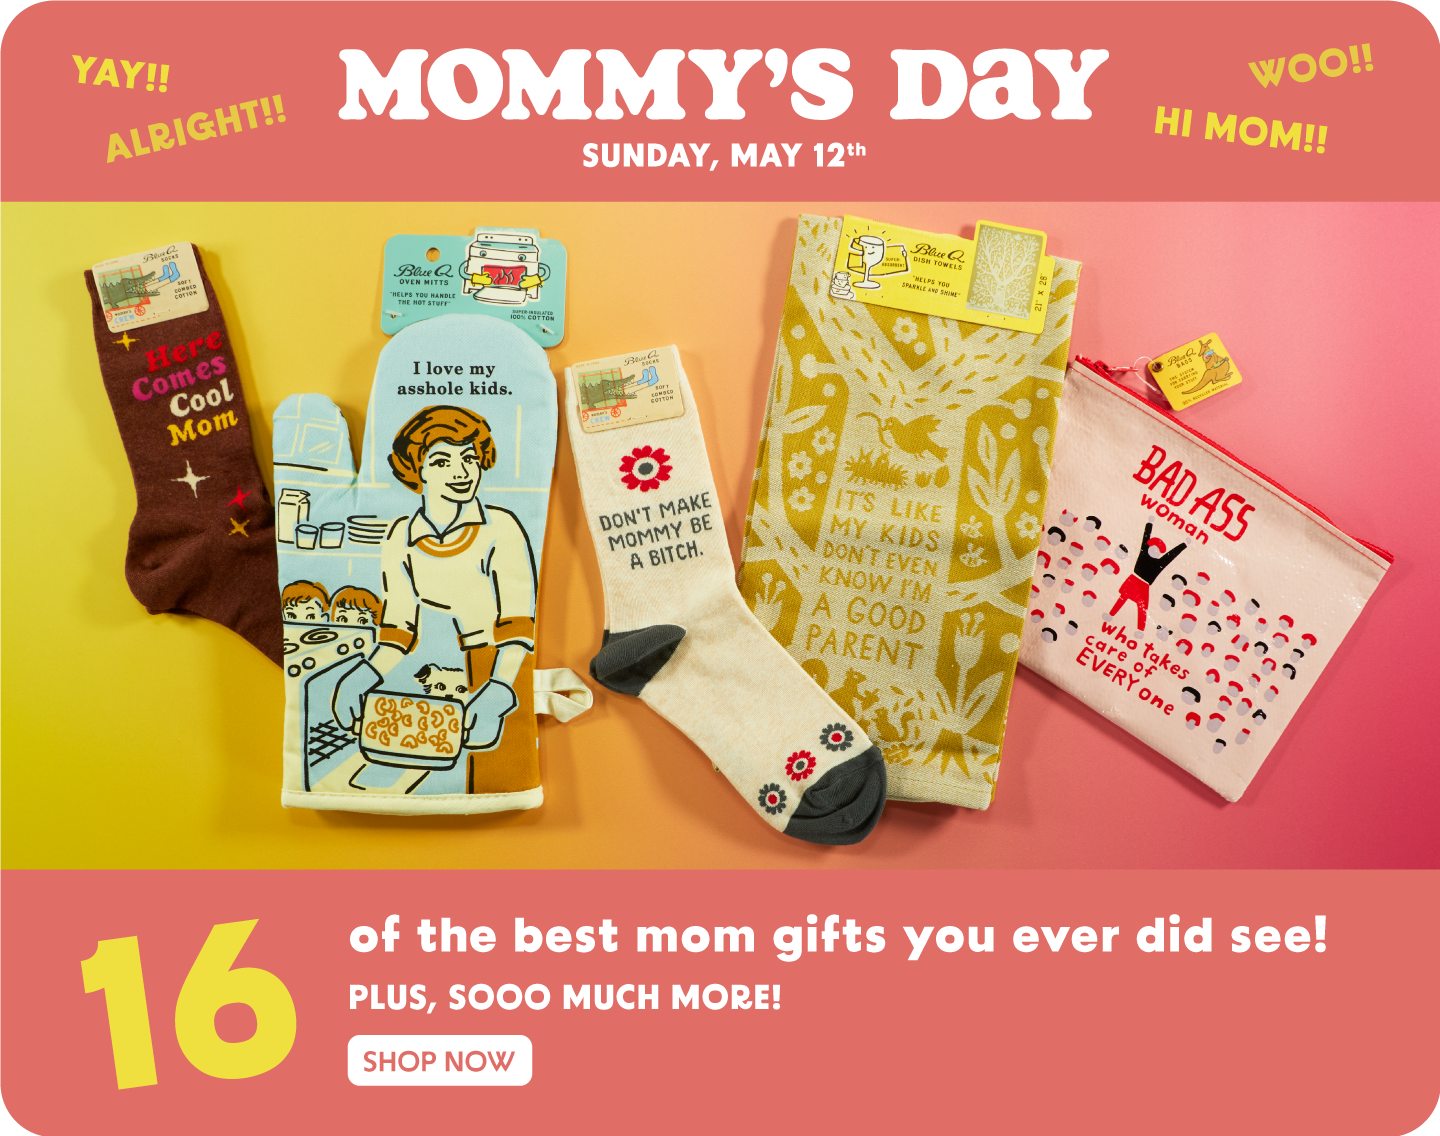 16 of the best mom gifts you ever did see! And so much more! 